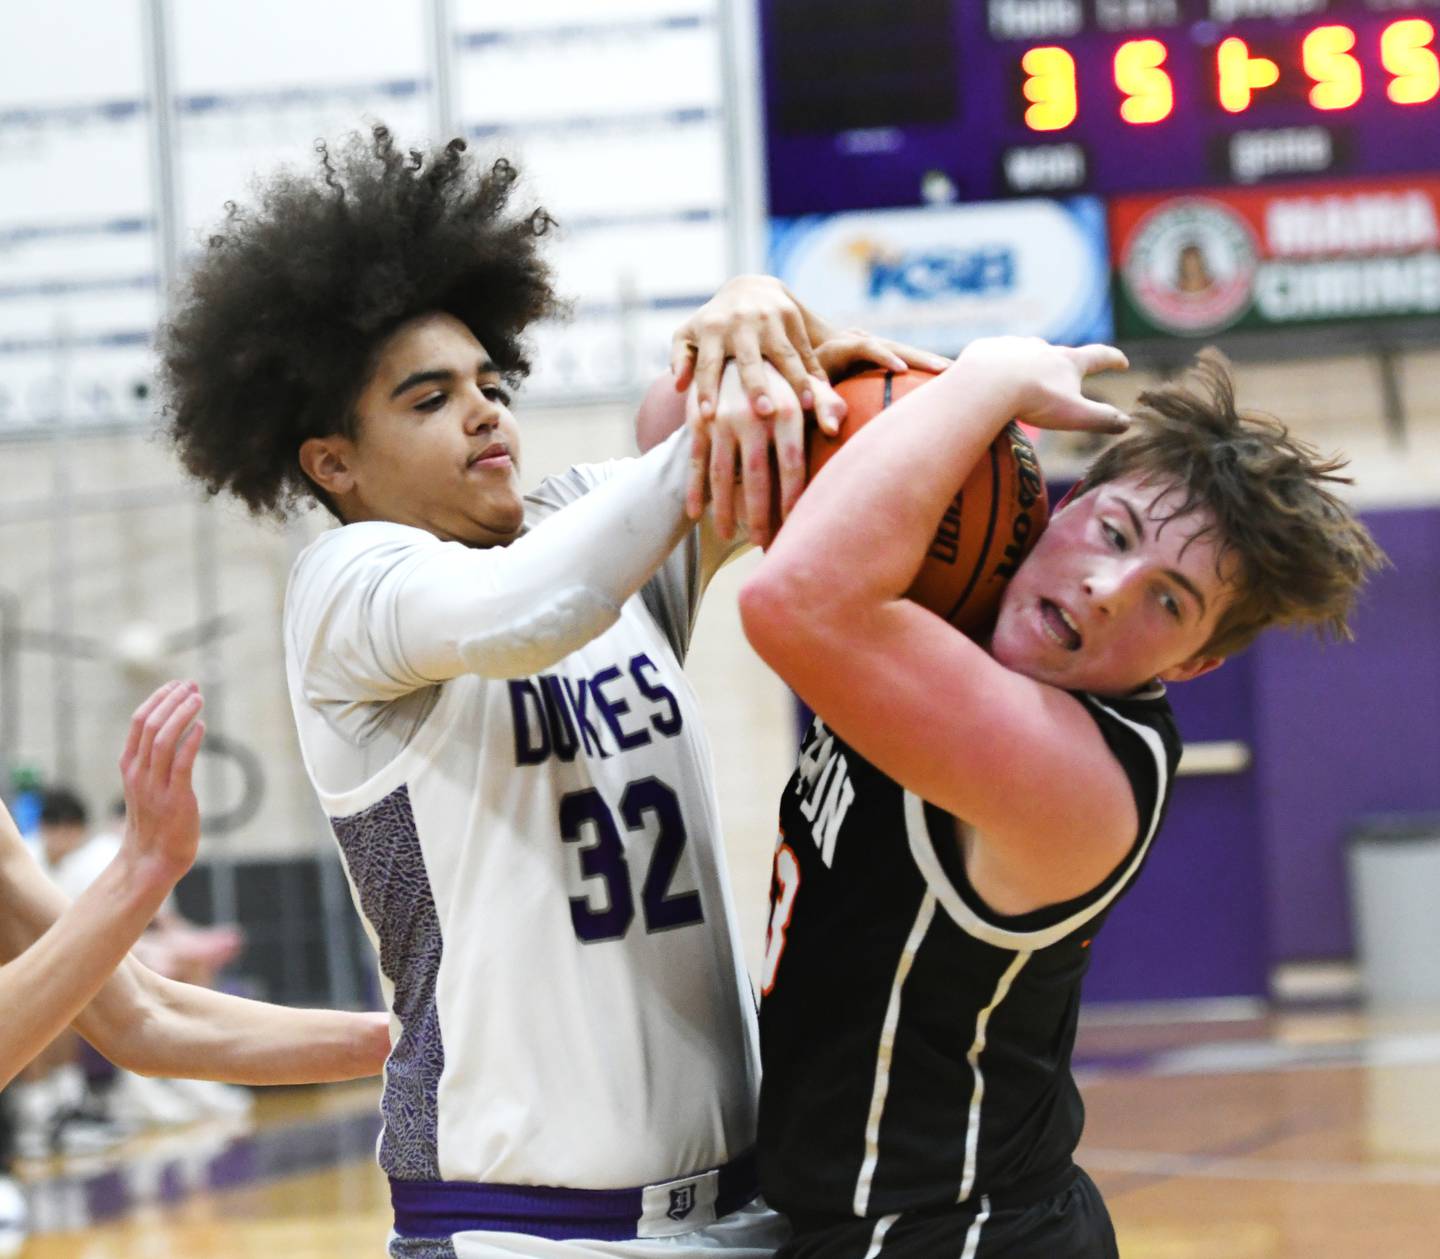 Dixon's Darius Harrington (32) and Byron's Caden Considine (33) battle for a rebound during Big Northern Conference action on Tuesday, Jan. 31 at Lancaster Gym in Dixon.